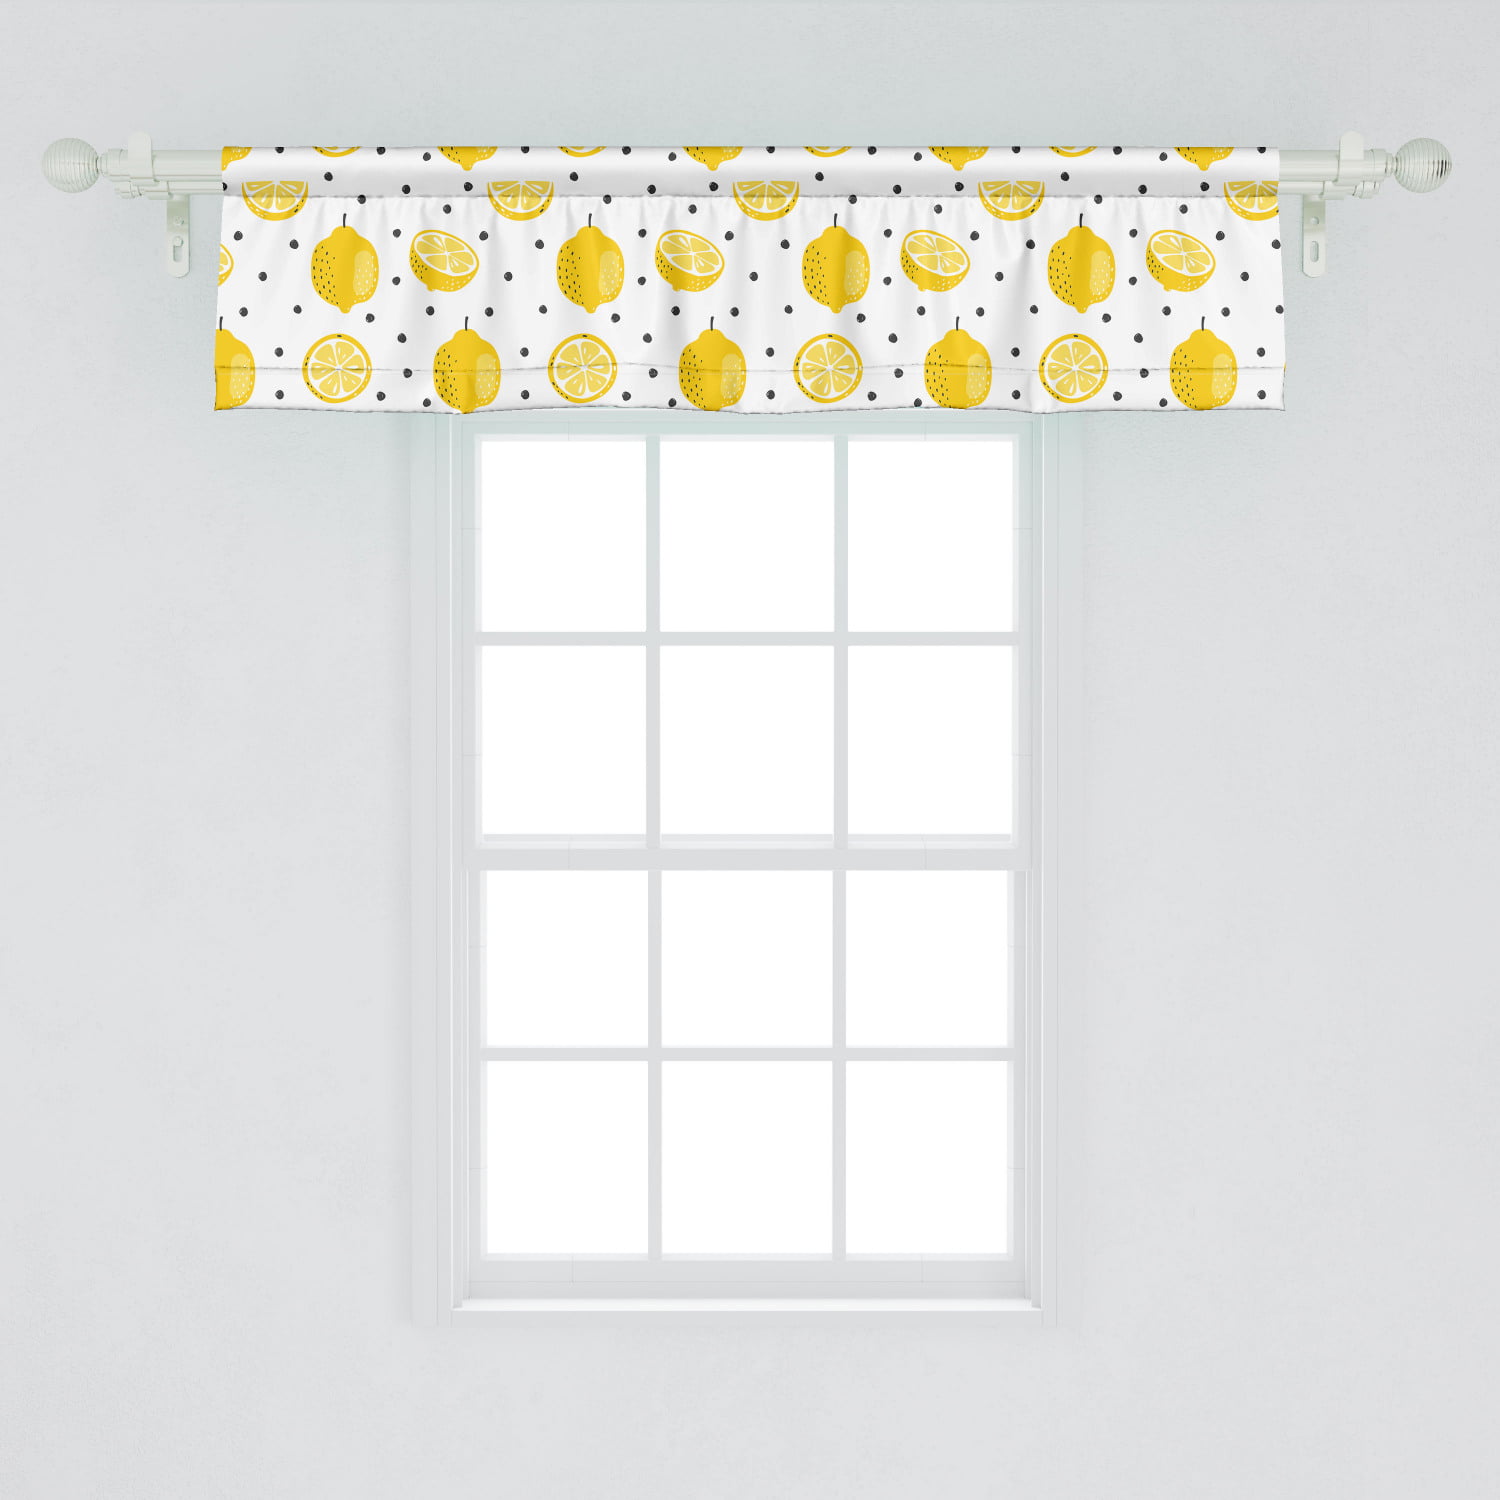 Ambesonne Lemon Window Valance, Summer Pattern of Whole and Halved Citrus  Fruit with Polka Dots, Curtain Valance for Kitchen Bedroom Decor with Rod  ...